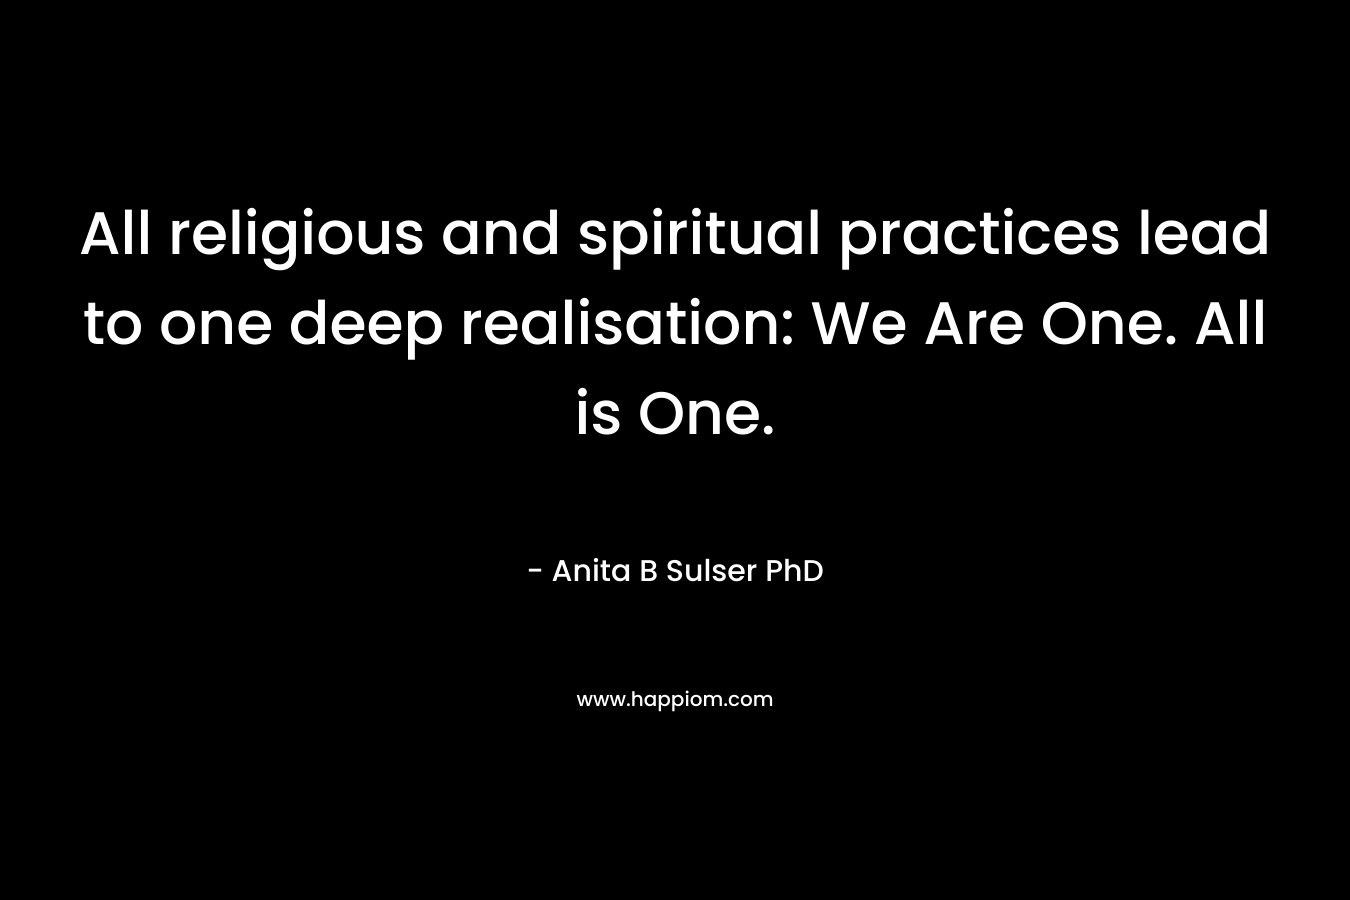 All religious and spiritual practices lead to one deep realisation: We Are One. All is One. – Anita B Sulser PhD